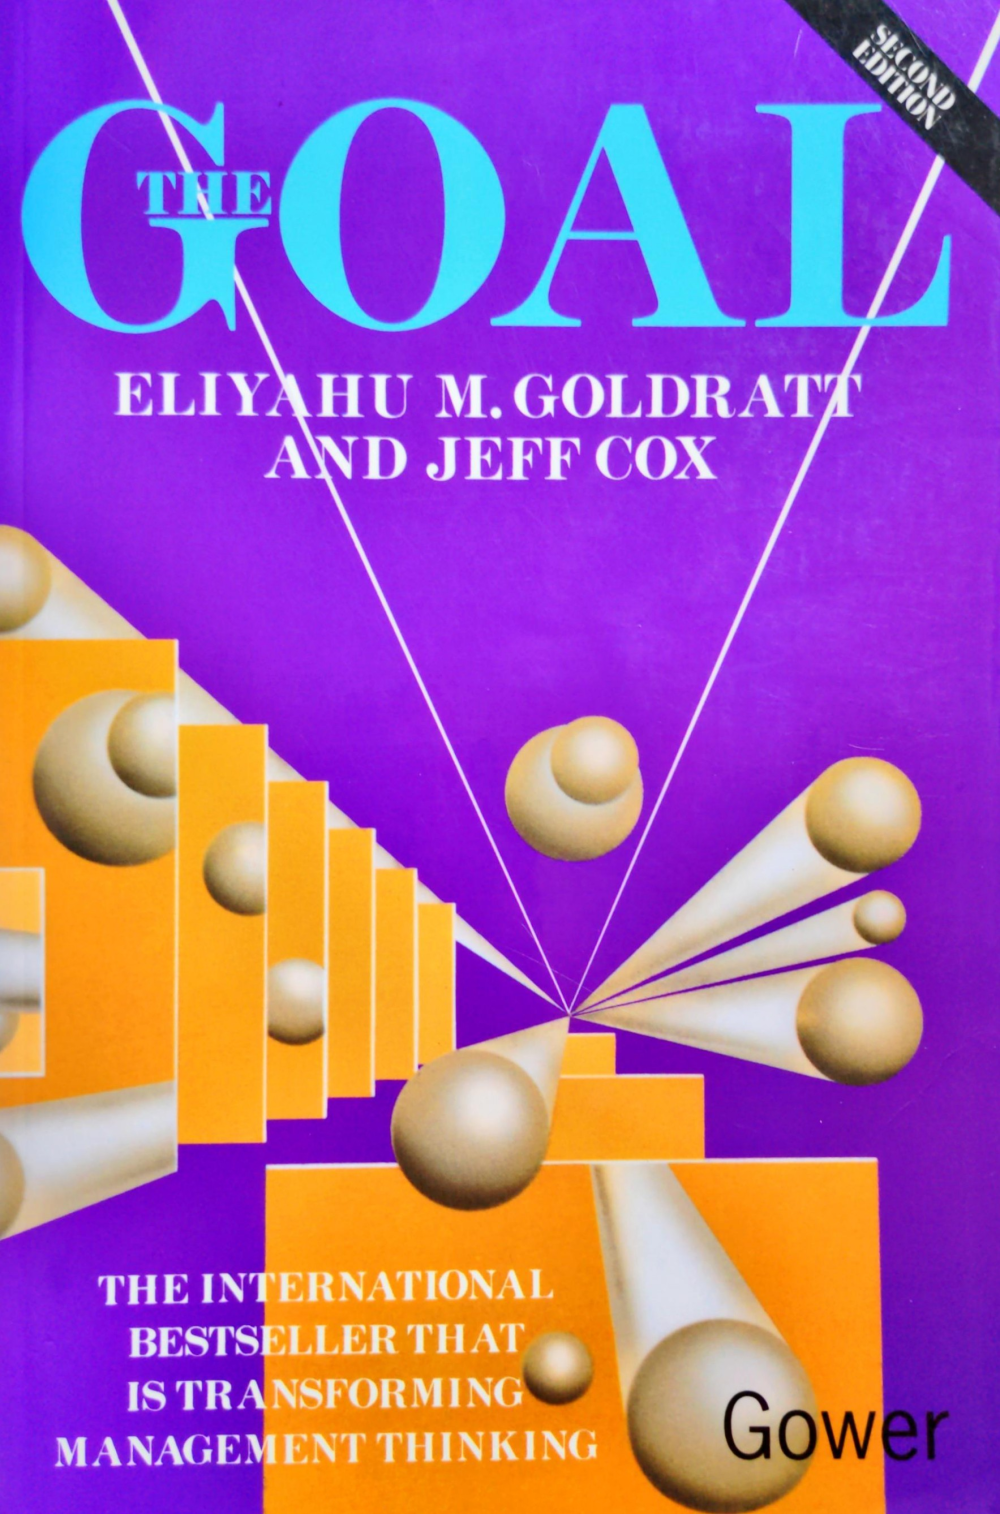 The Goal cover features a picture of Eli Goldratt and a selection of endorsements